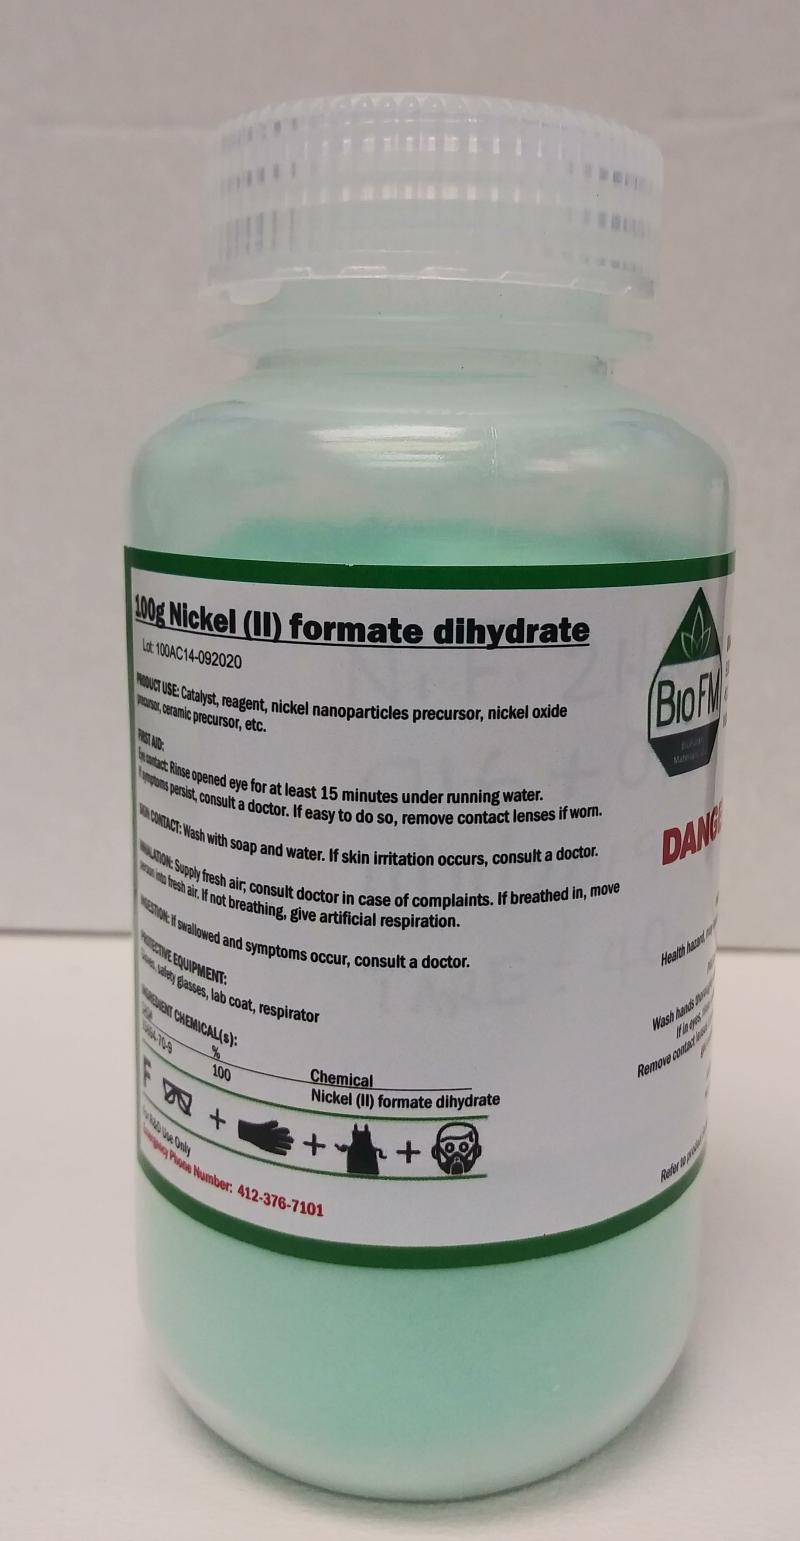 100g Nickel formate dihydrate